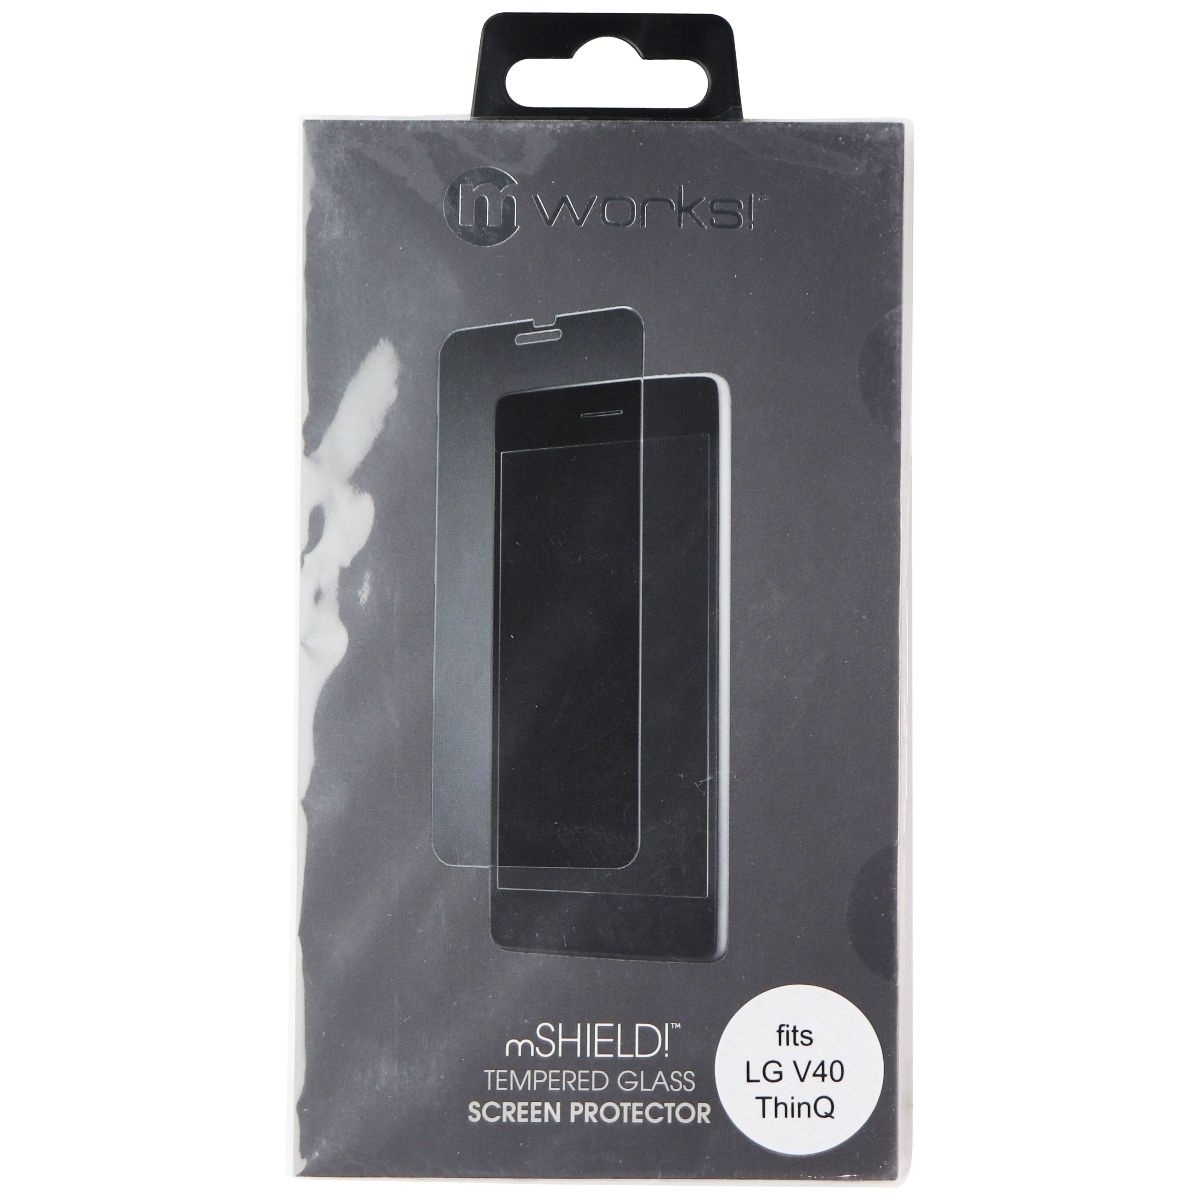 MWorks! MShield! Tempered Glass For LG V40 ThinQ - Clear